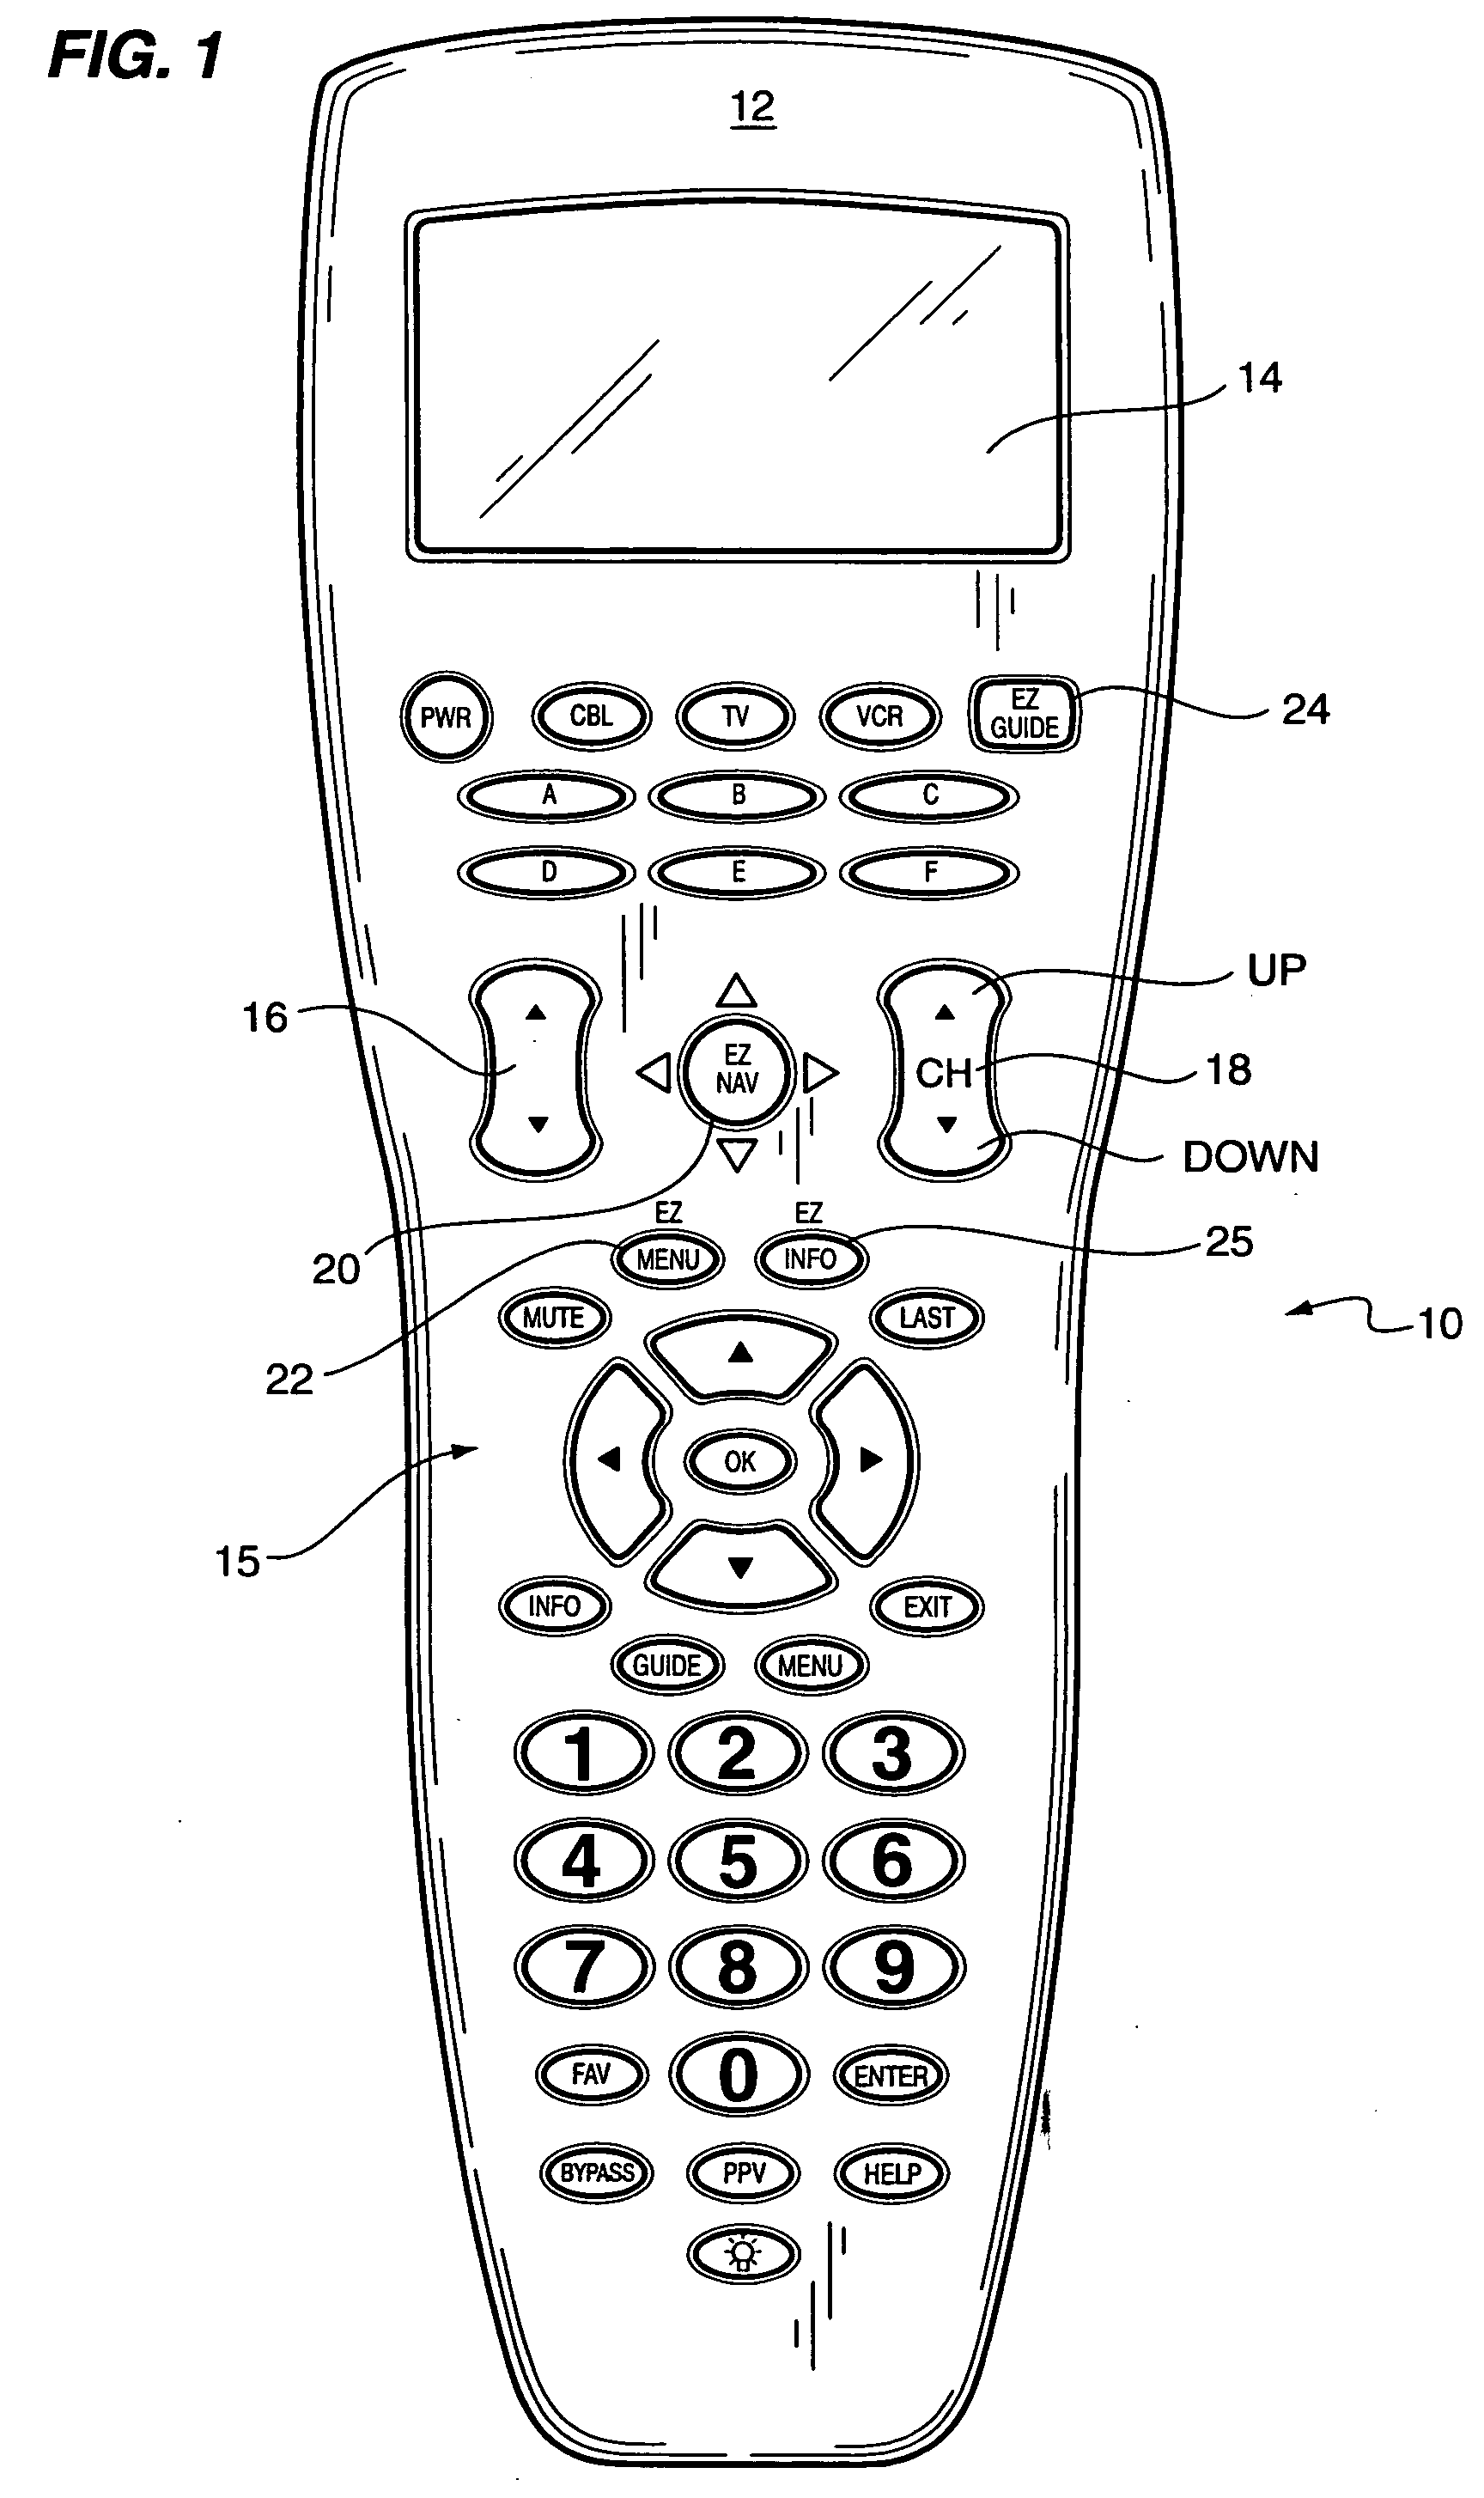 Systems and methods for awarding affinity points based upon remote control usage